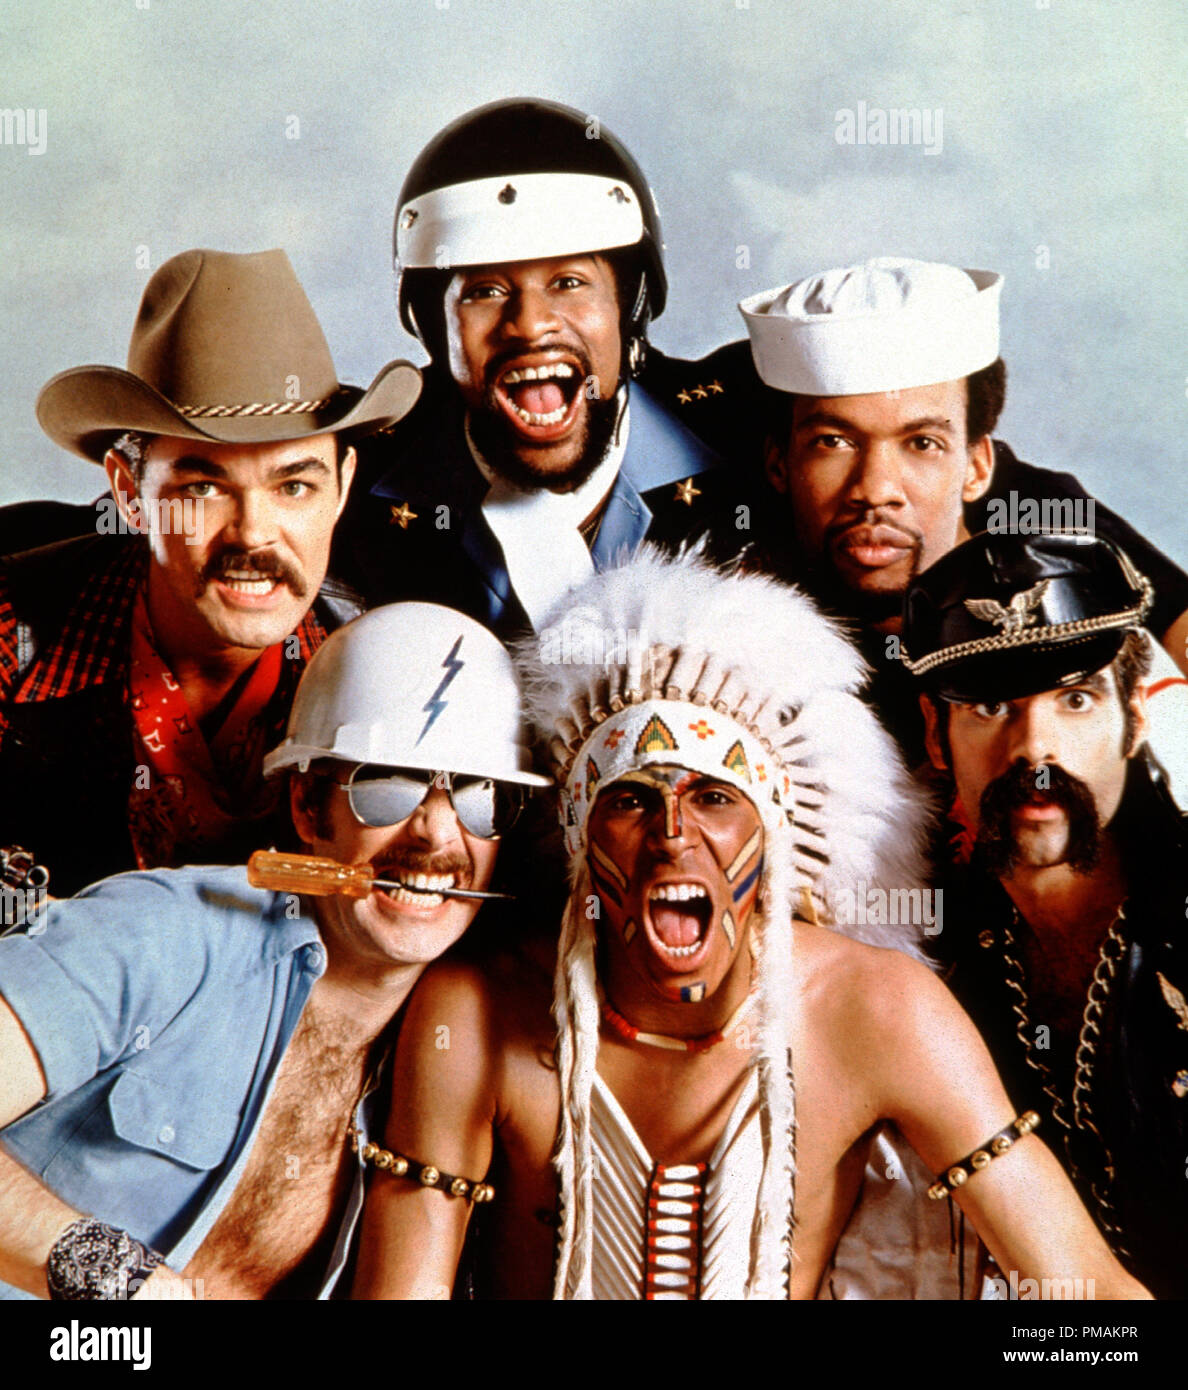 Publicity photo of the music group, 'The Village People' circa 1980    File Reference # 33300 662THA Stock Photo